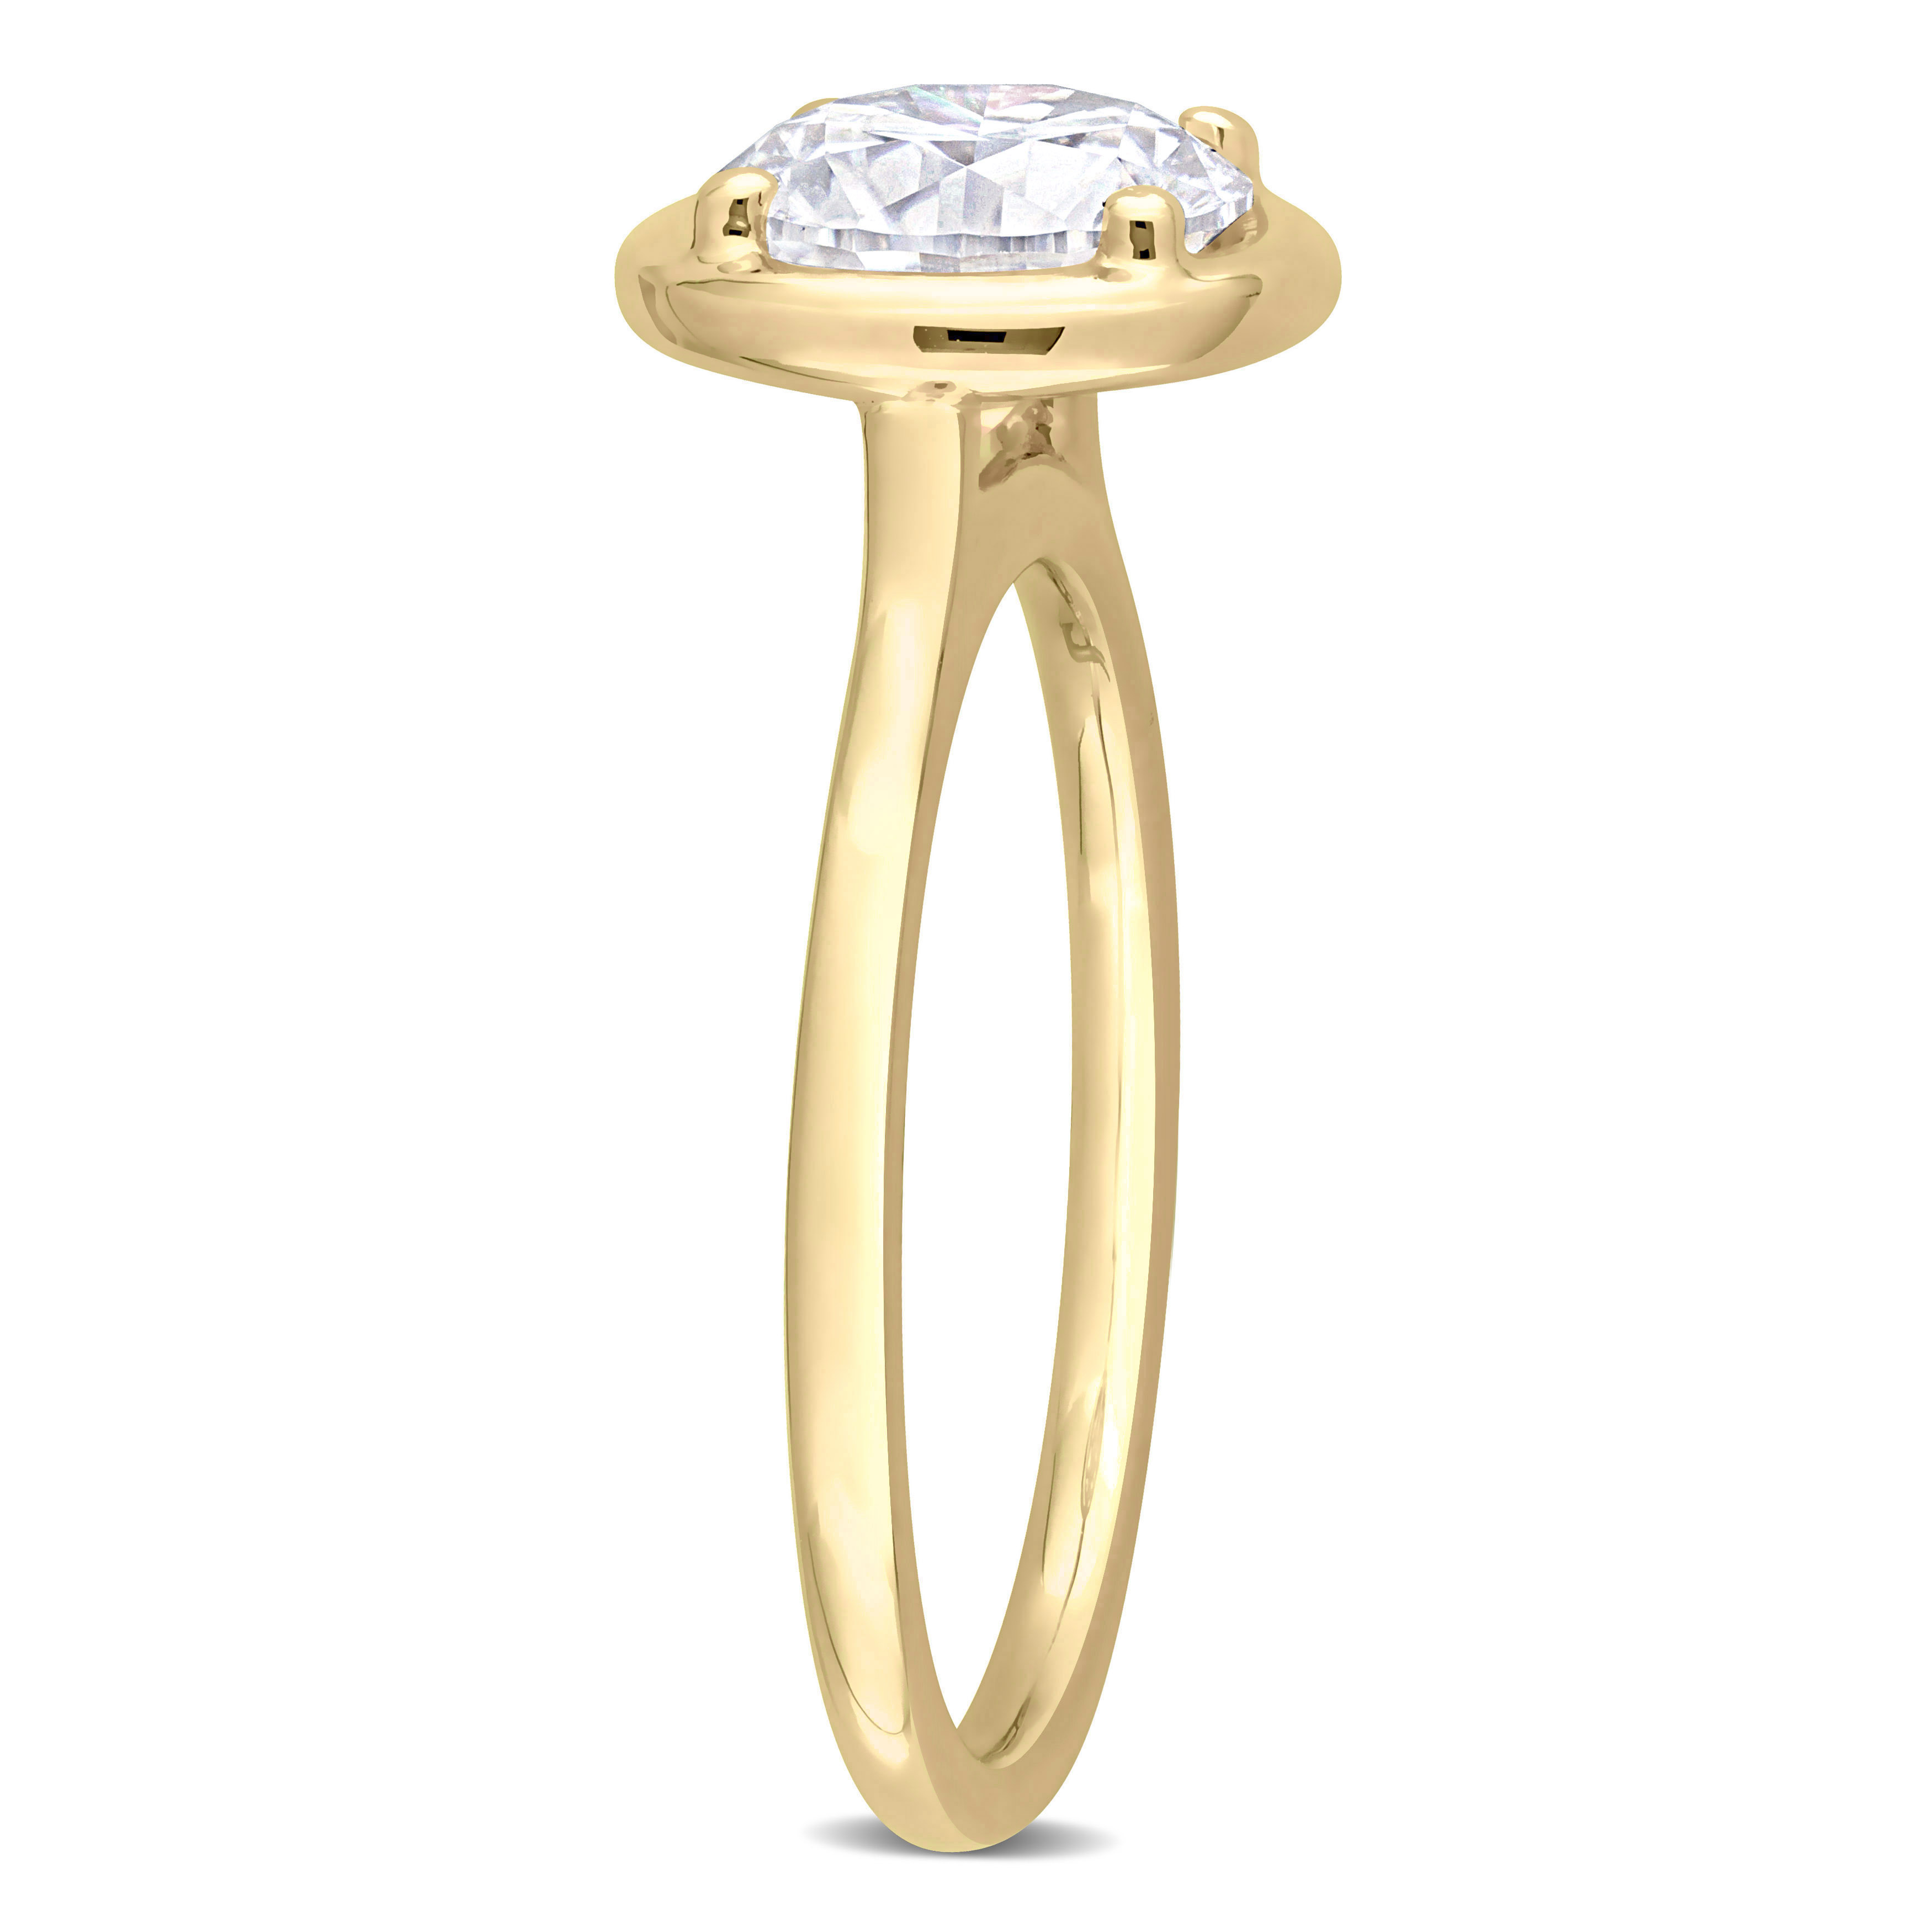 1 4/5 CT DEW Created Moissanite Engagement Ring in 10k Yellow Gold